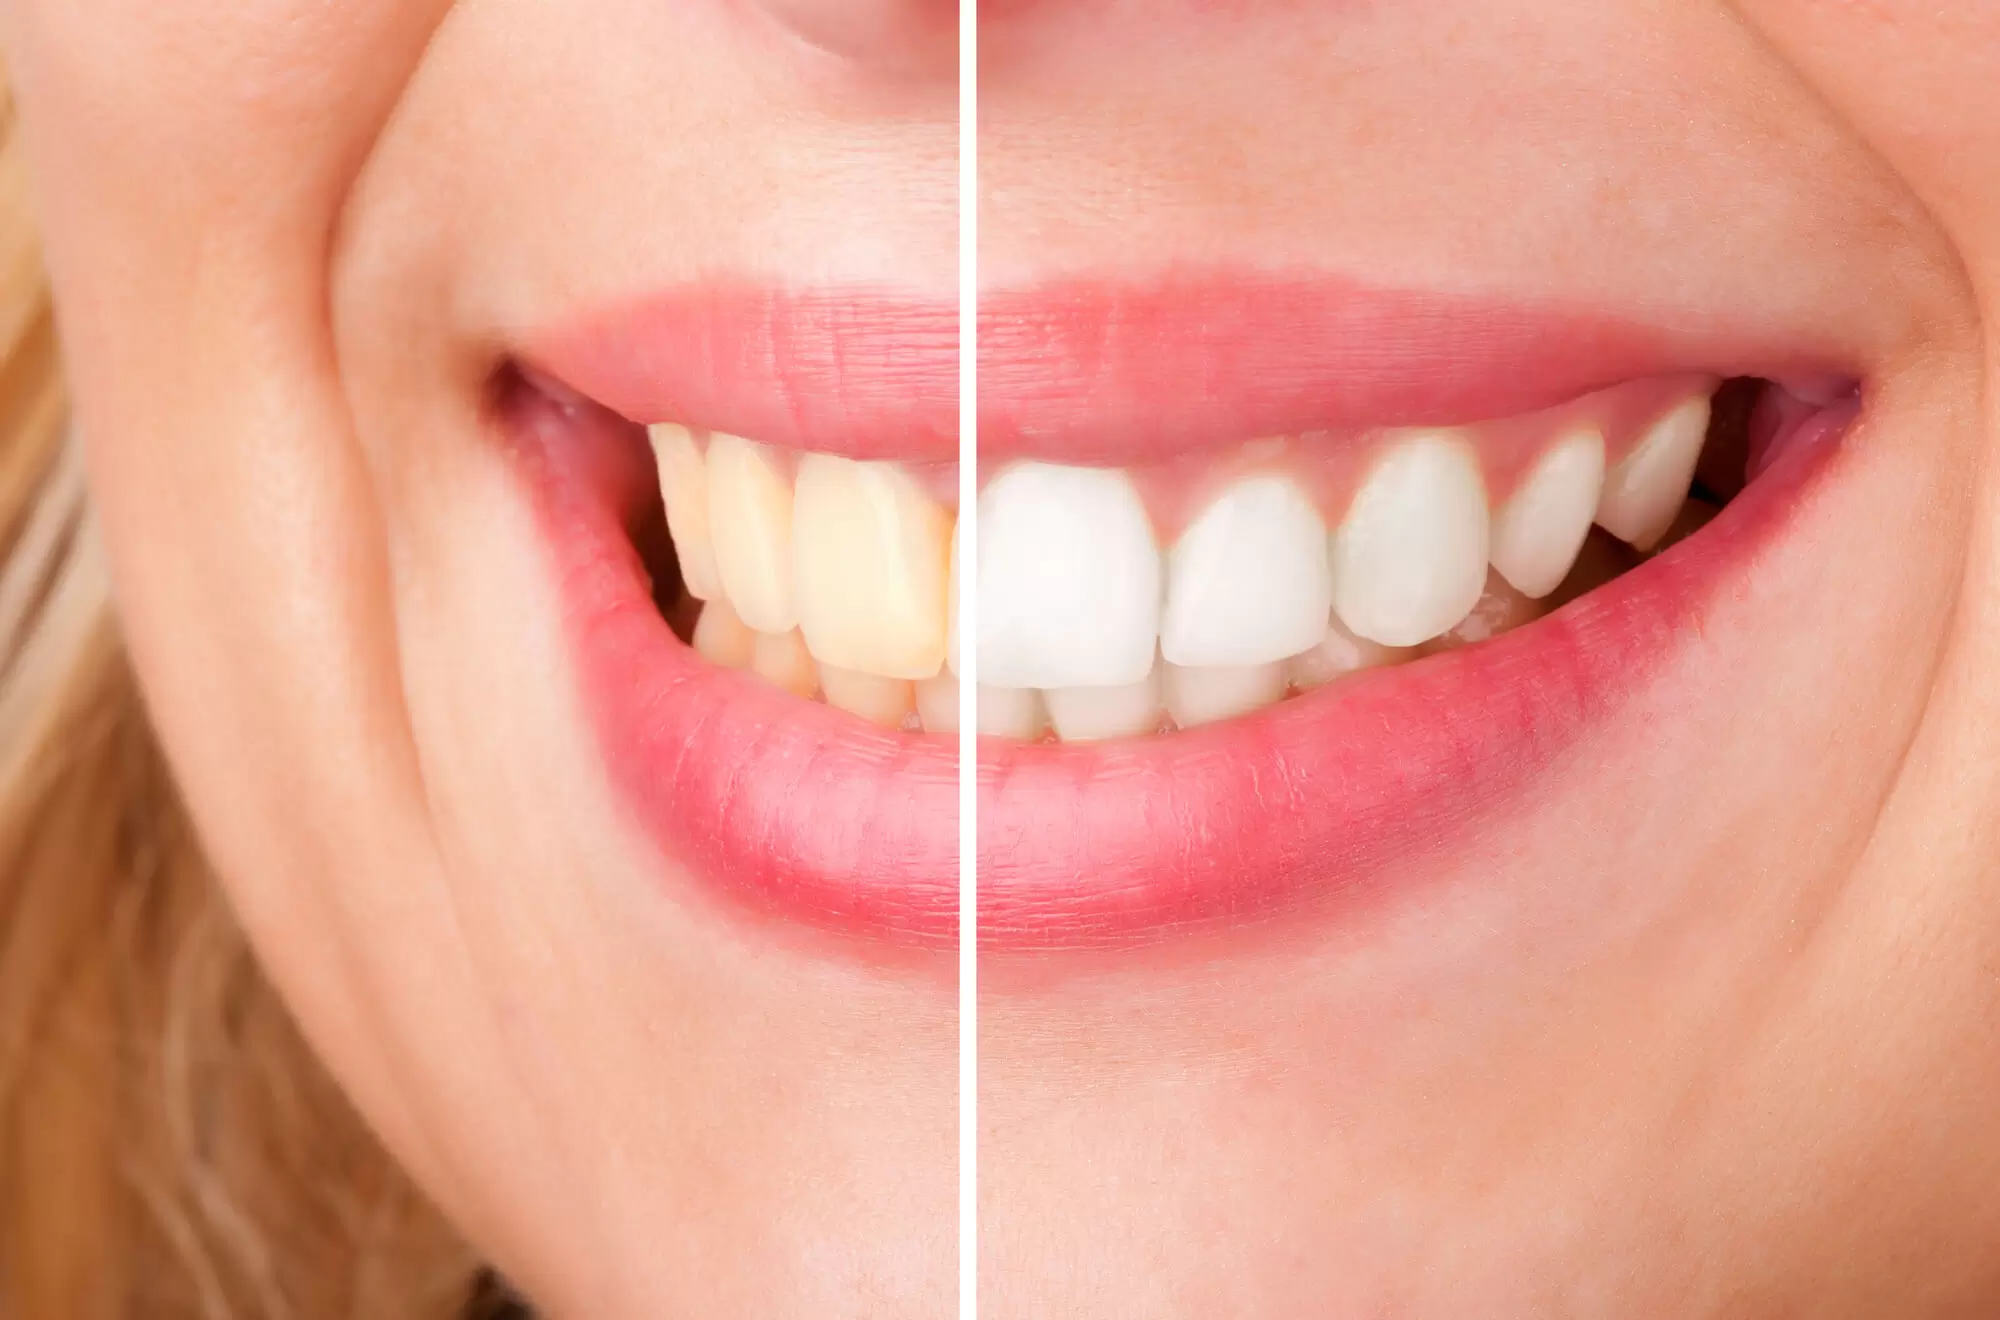 comparison of dull and white teeth dental implants in Miami